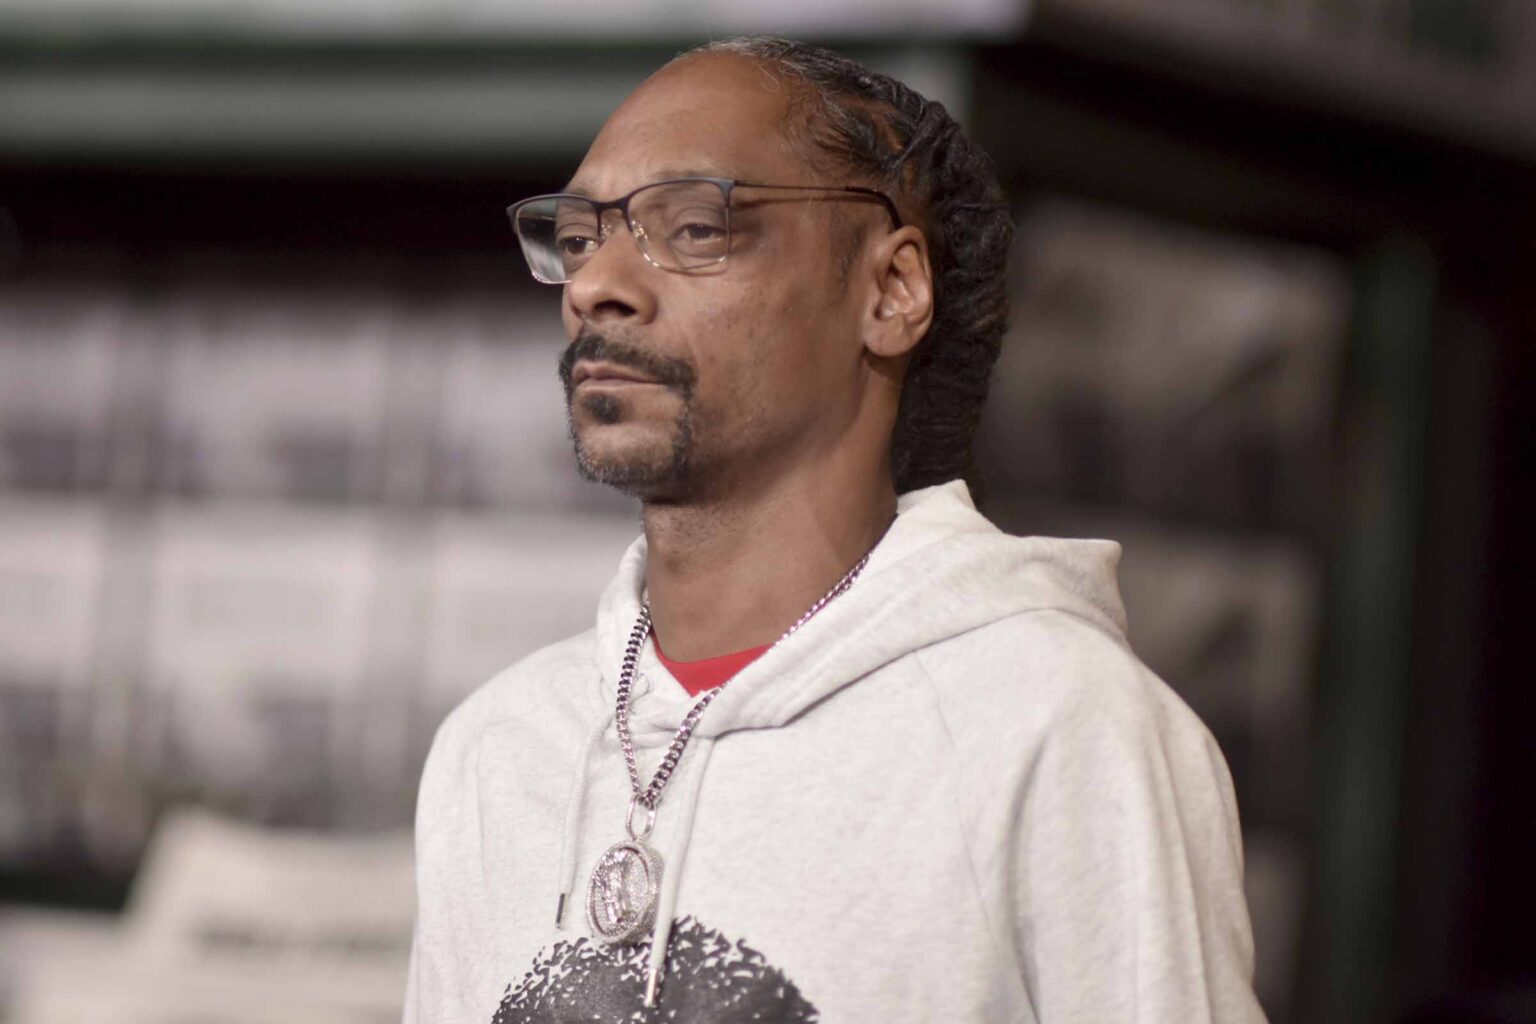 We all need something to unwind and relax, and we know the man who can help us with that: Snoop Dogg. Check out some of the best Snoop Dogg memes.